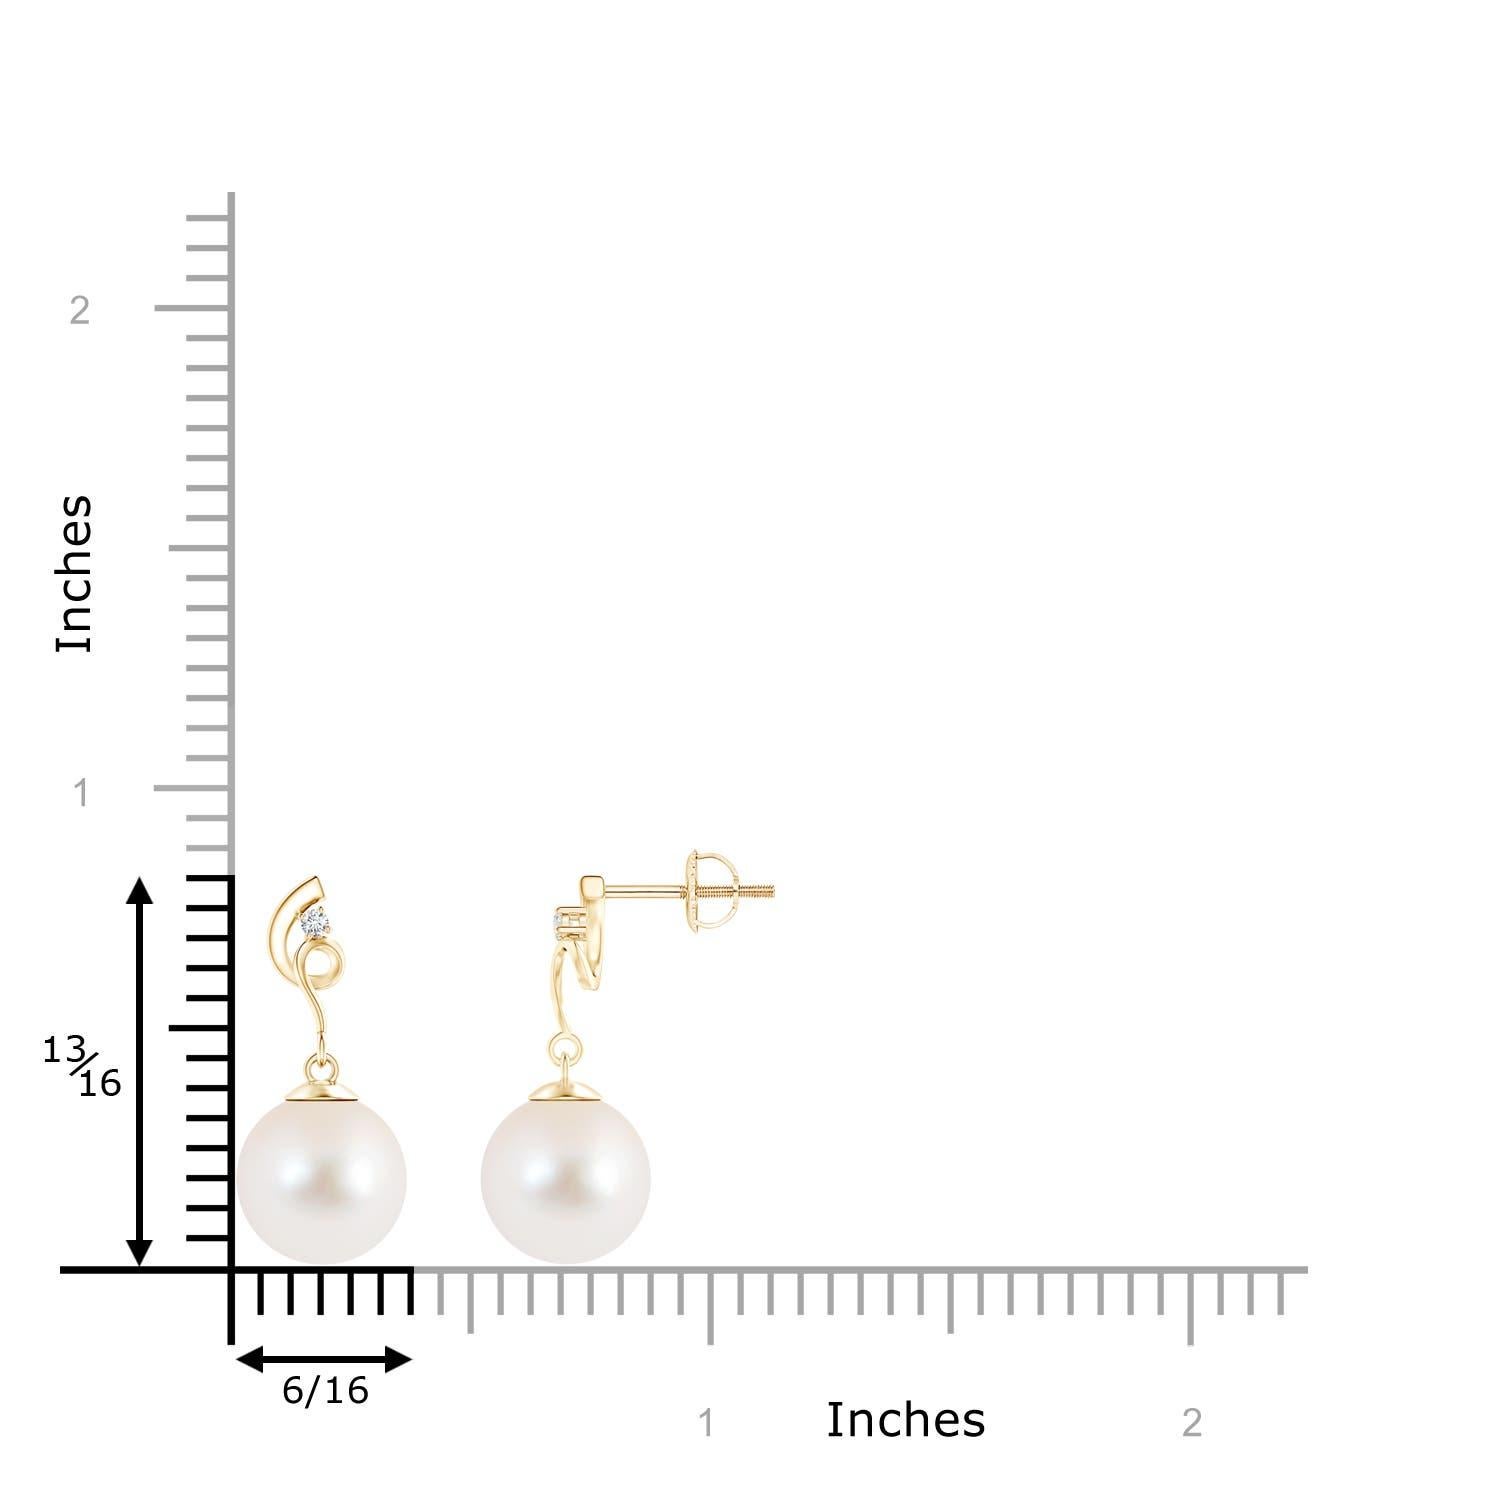 Round Freshwater cultured pearls dangle from the distinctly crafted twisted tops in 14K yellow gold. These pearl earrings exude an unconventional look with the twisted pattern teamed with the elegant pearls. Adorned with a dazzling diamond on each